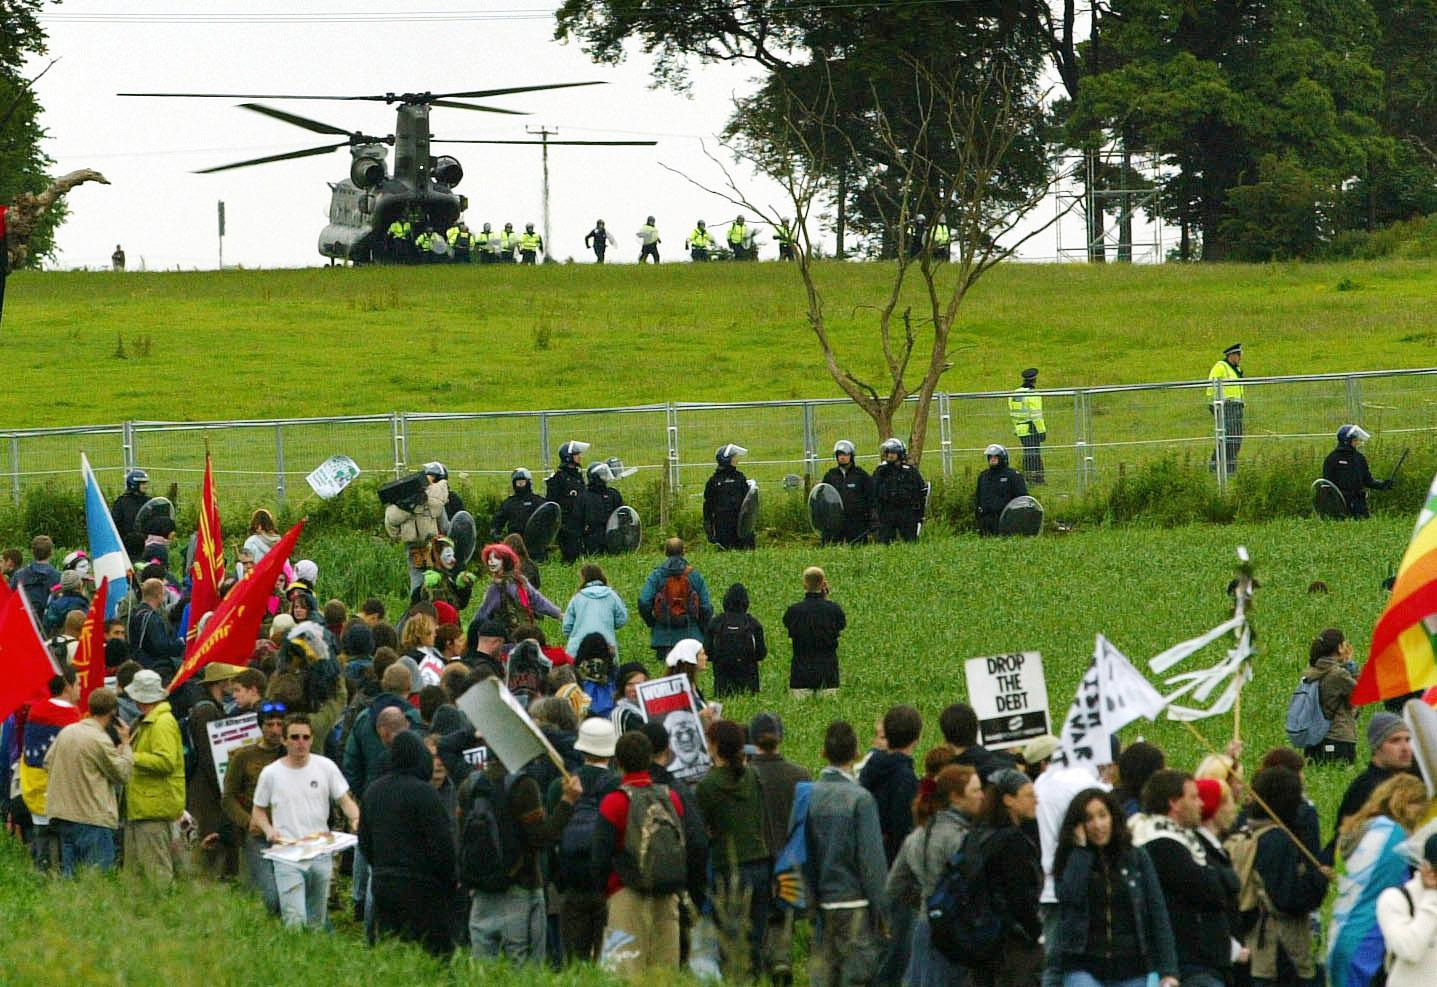 Police reinforcements are drafted in by helicopter, after protestors breached the security fence at Auchterarder during the G8 summit at Gleneagles in 2005.